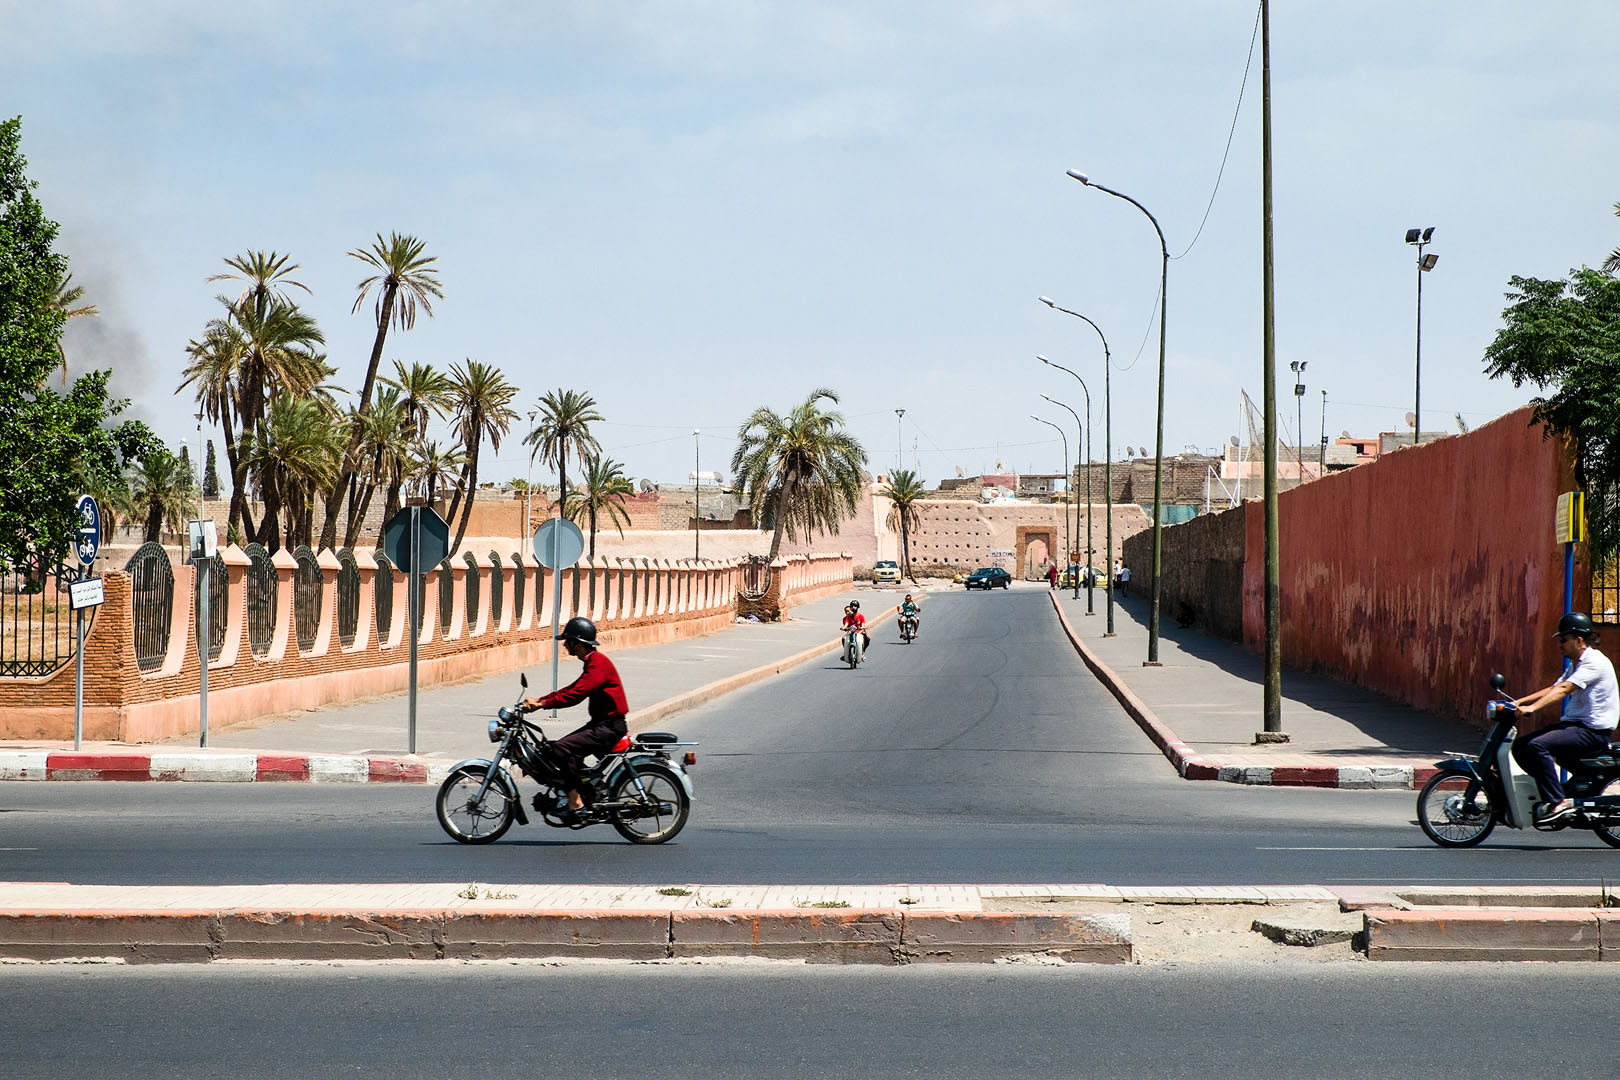 Wide Marrakech street scene with palm trees and scooters